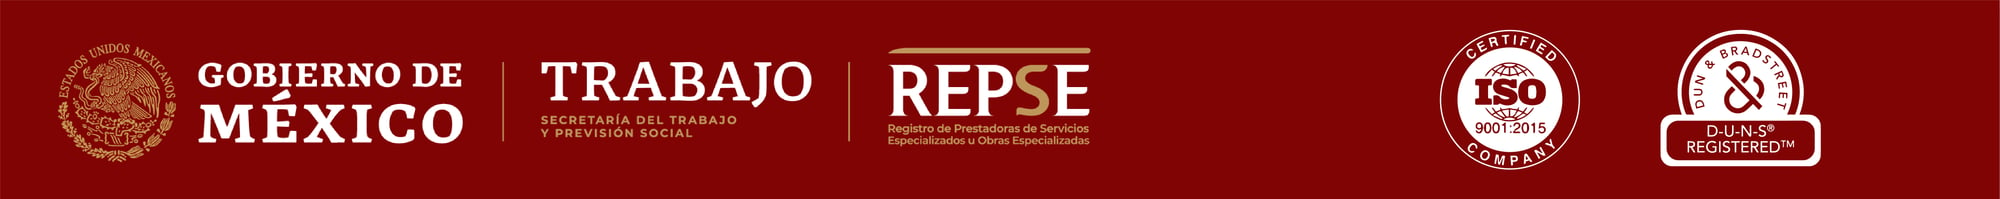 RPSE ISO 9001:2015